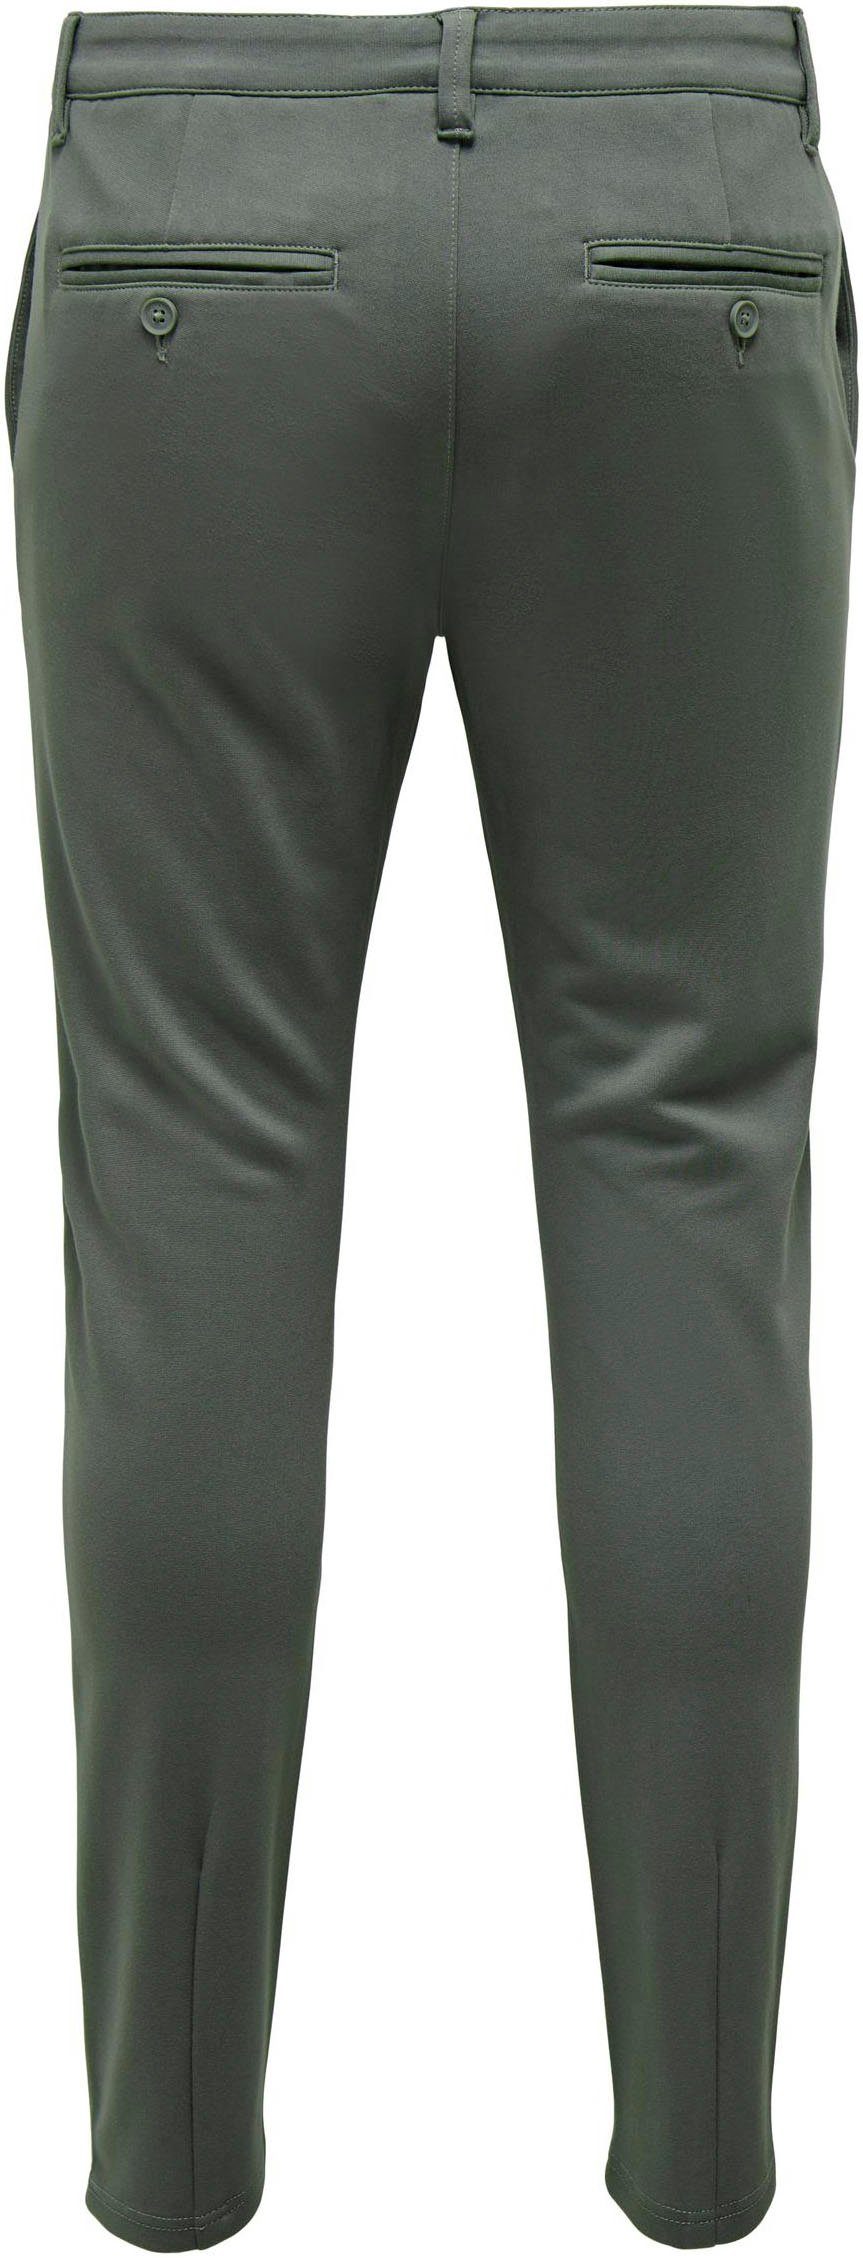 ONLY & SONS Chino ONSMARK SLIM GW 0209 PANT NOOS